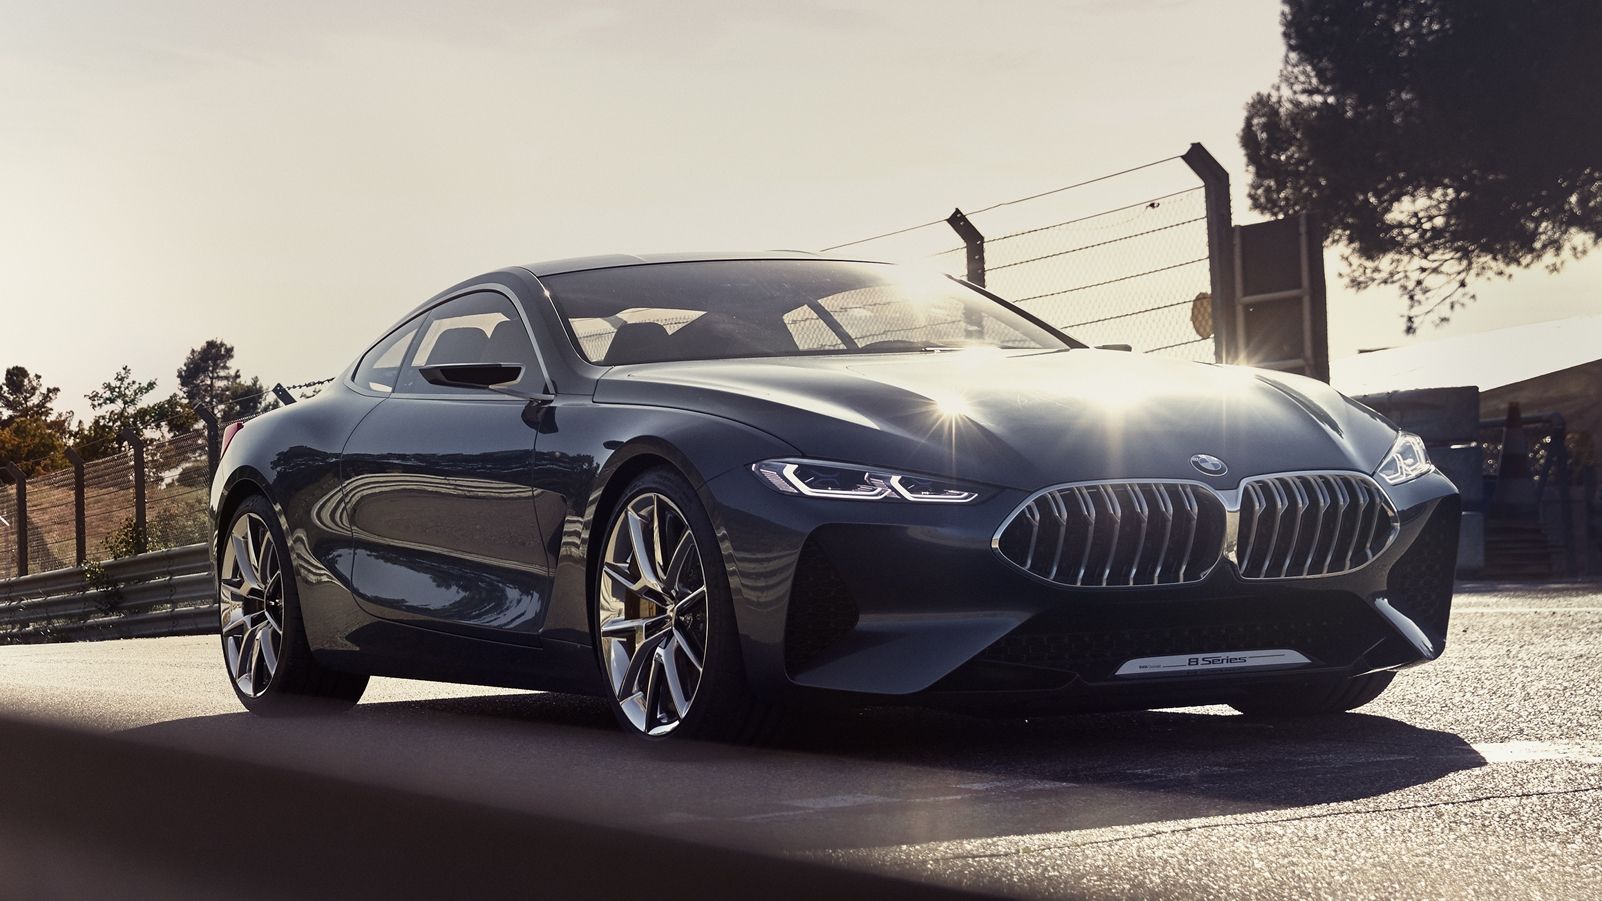 The Next-Gen BMW 8 Series Will Be Radically Different